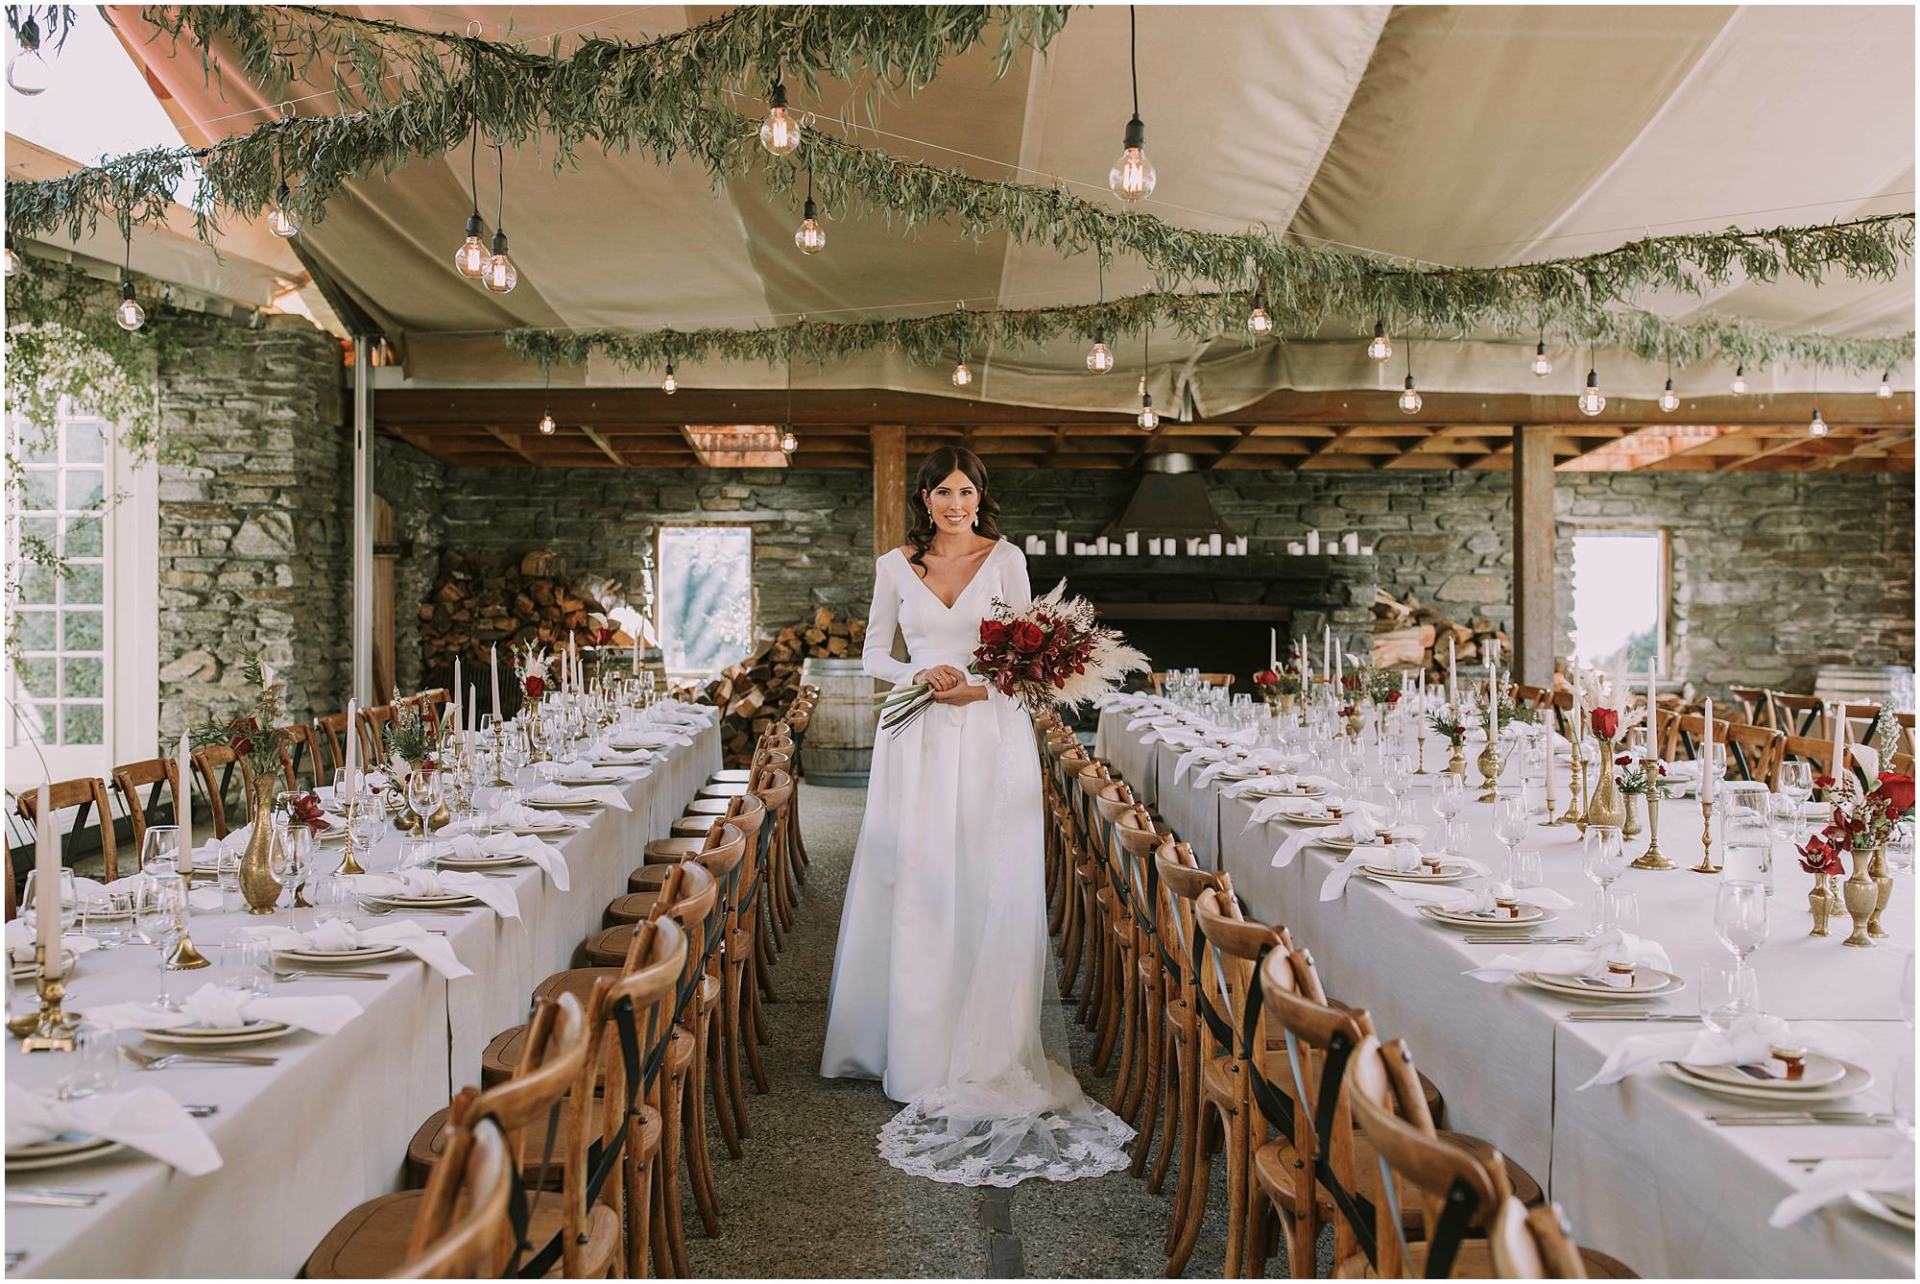 Charlotte Kiri - Wedding Photography of a bride wearing an elegant long-sleeved V-necked dress with a sheer floral lace veil, and holding a dark mahogany floral and toi toi bouquet amidst long tables, wooden chairs, and formal settings at the reception in Queenstown, New Zealand.